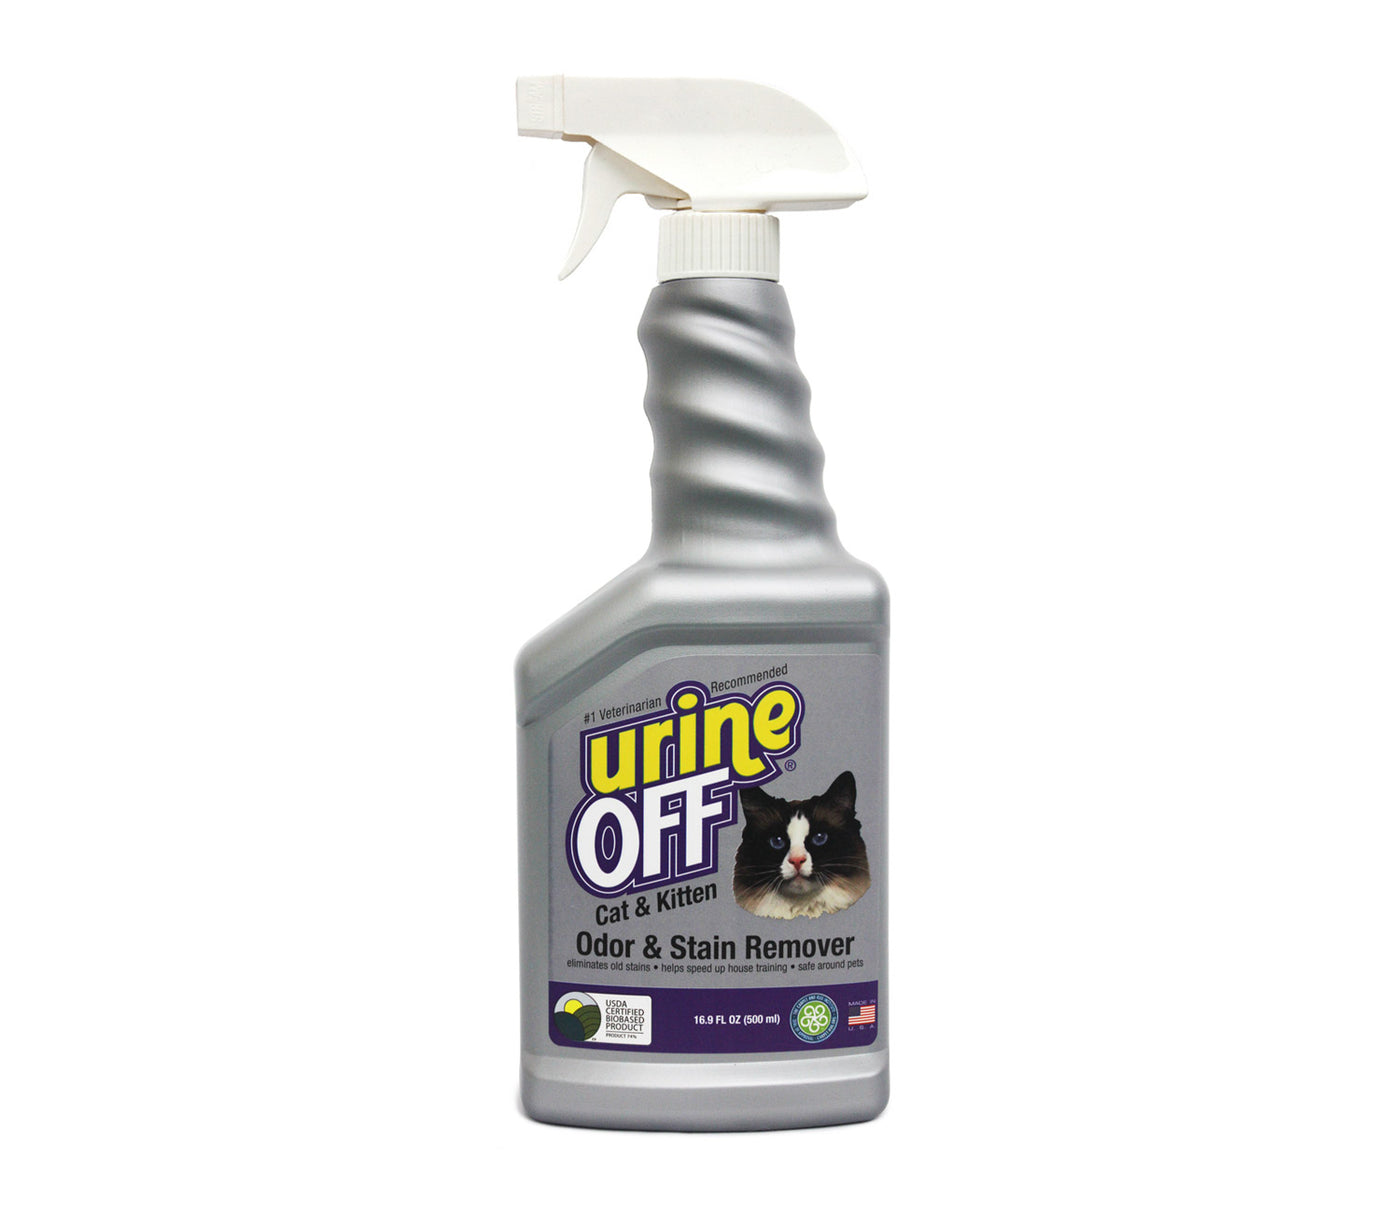 Urine Off - Cat & Kitten Odor and Stain Remover